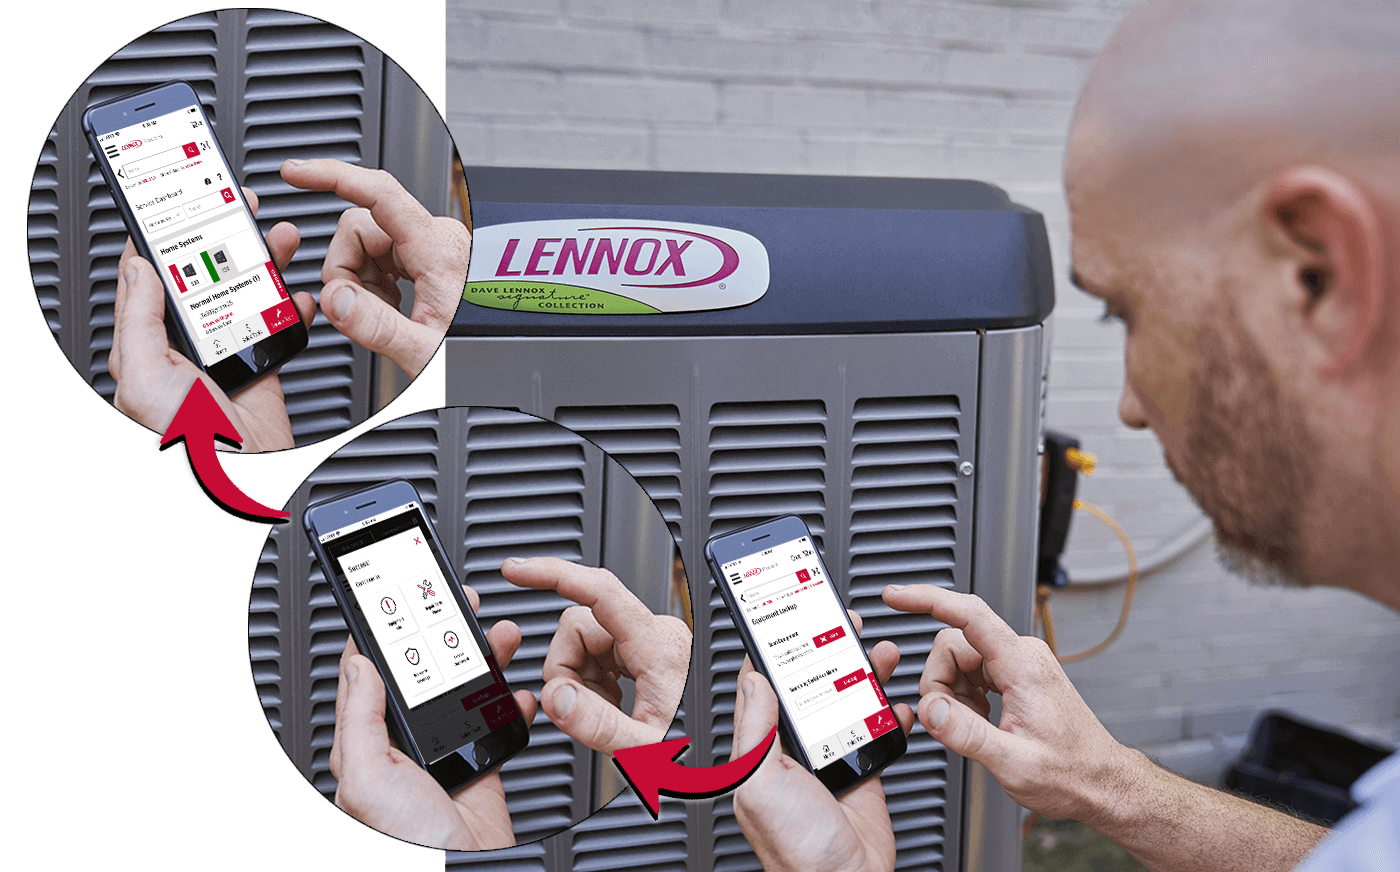 HVAC tech using Lennoxpros app on phone to service unit.